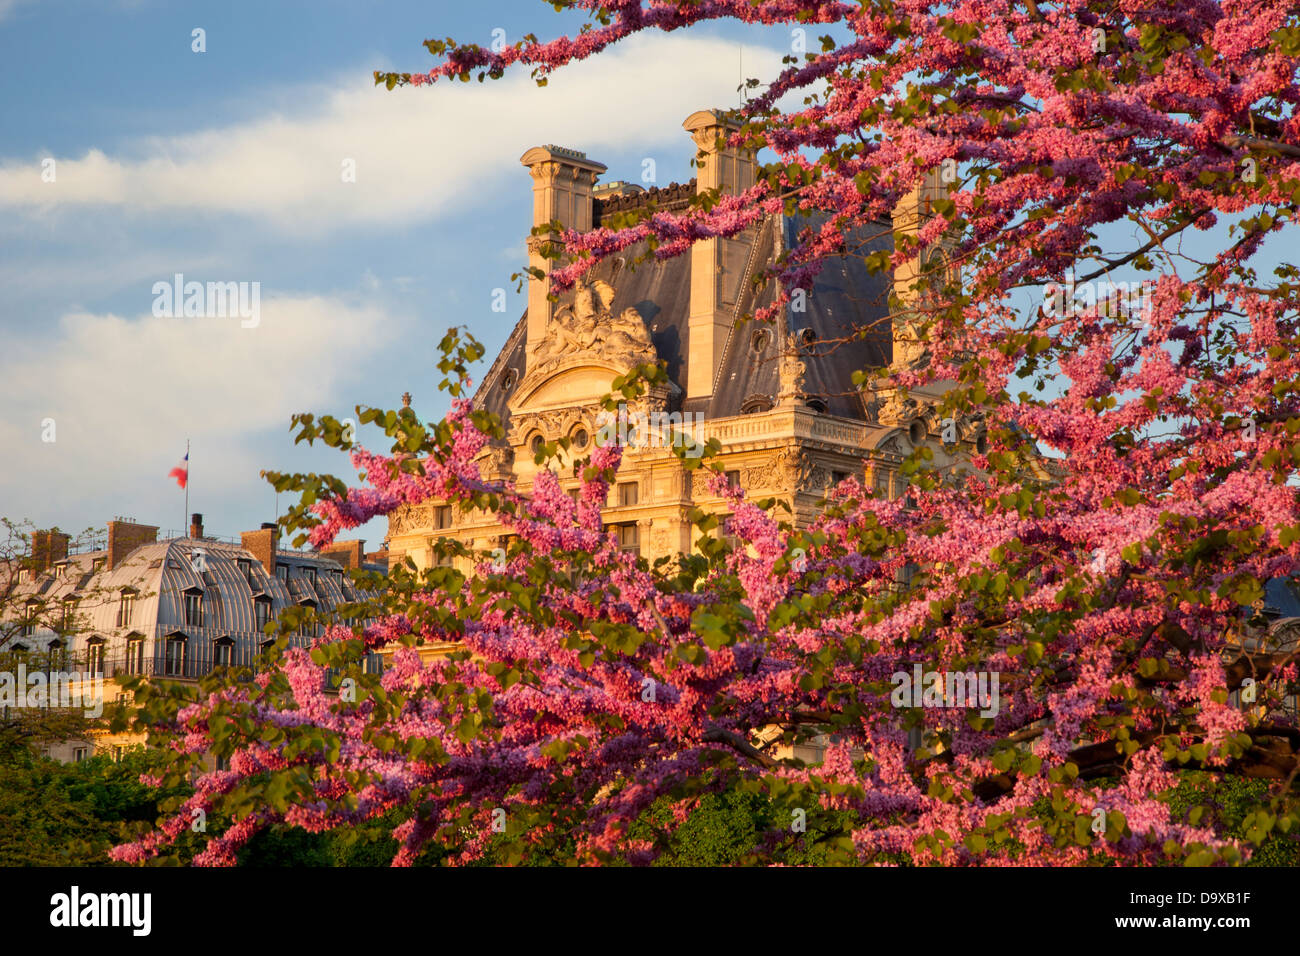 Blossoming trees in Jardin des Tuileries with Musee du Louvre beyond, Paris France Stock Photo